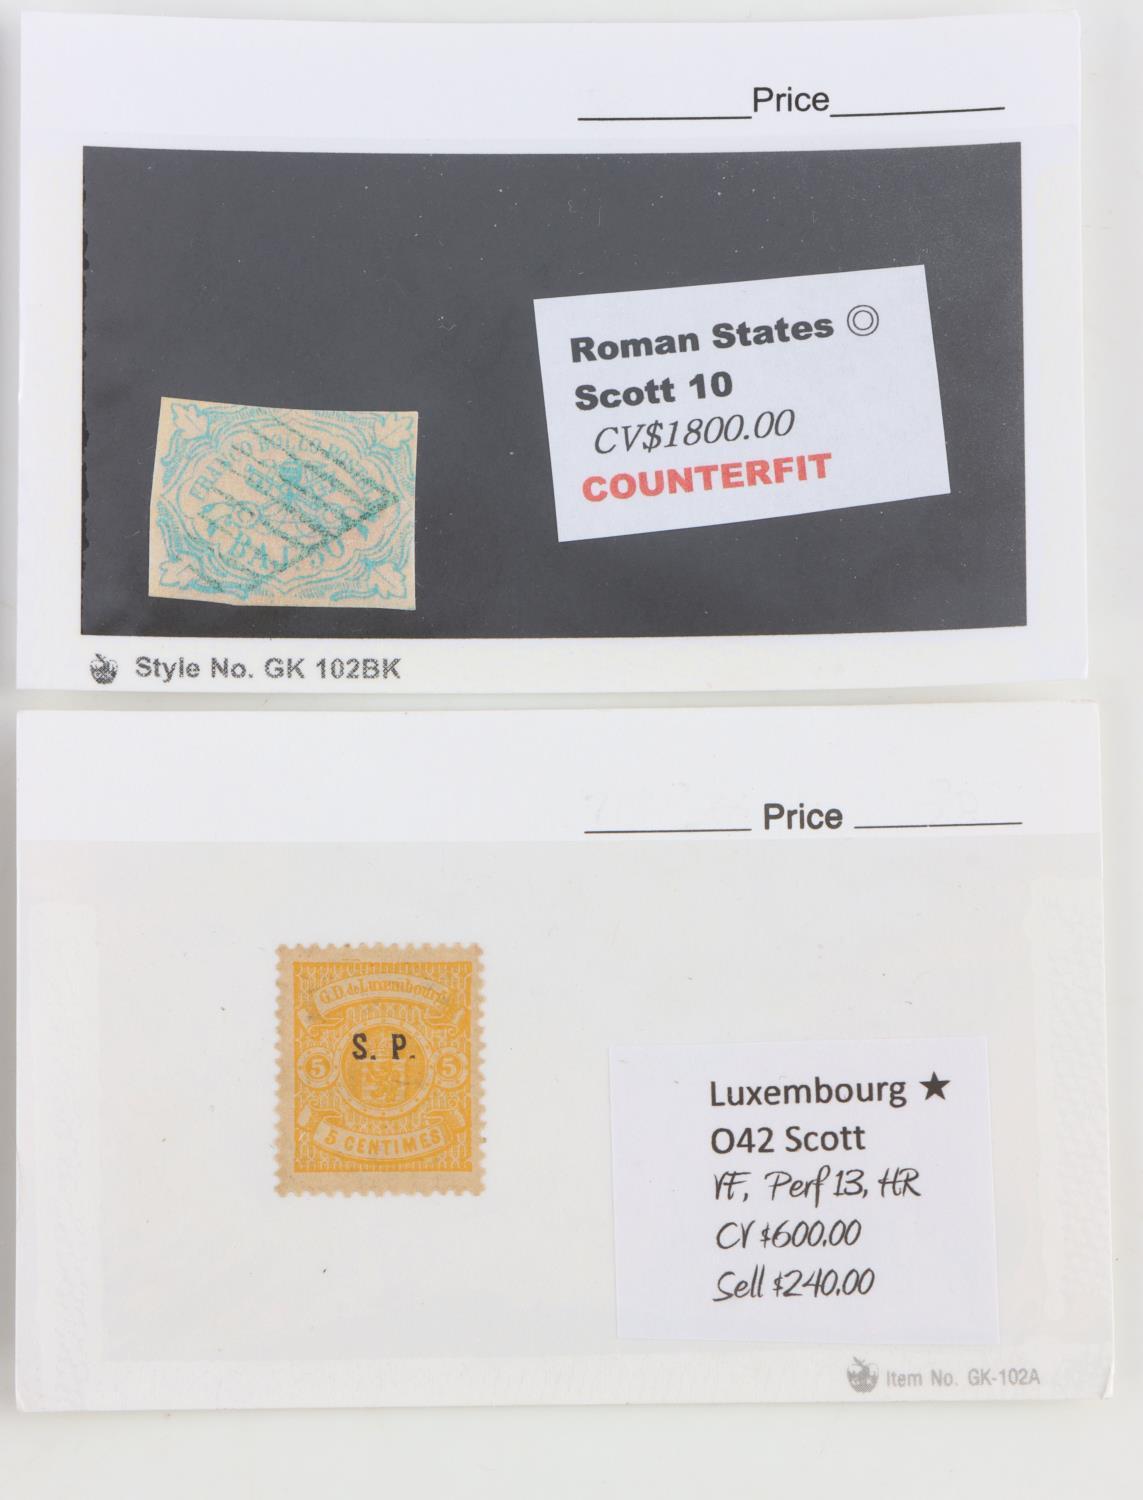 3 HIGH VALUE STAMPS AND 1 COUNTERFEIT VALUE $2050